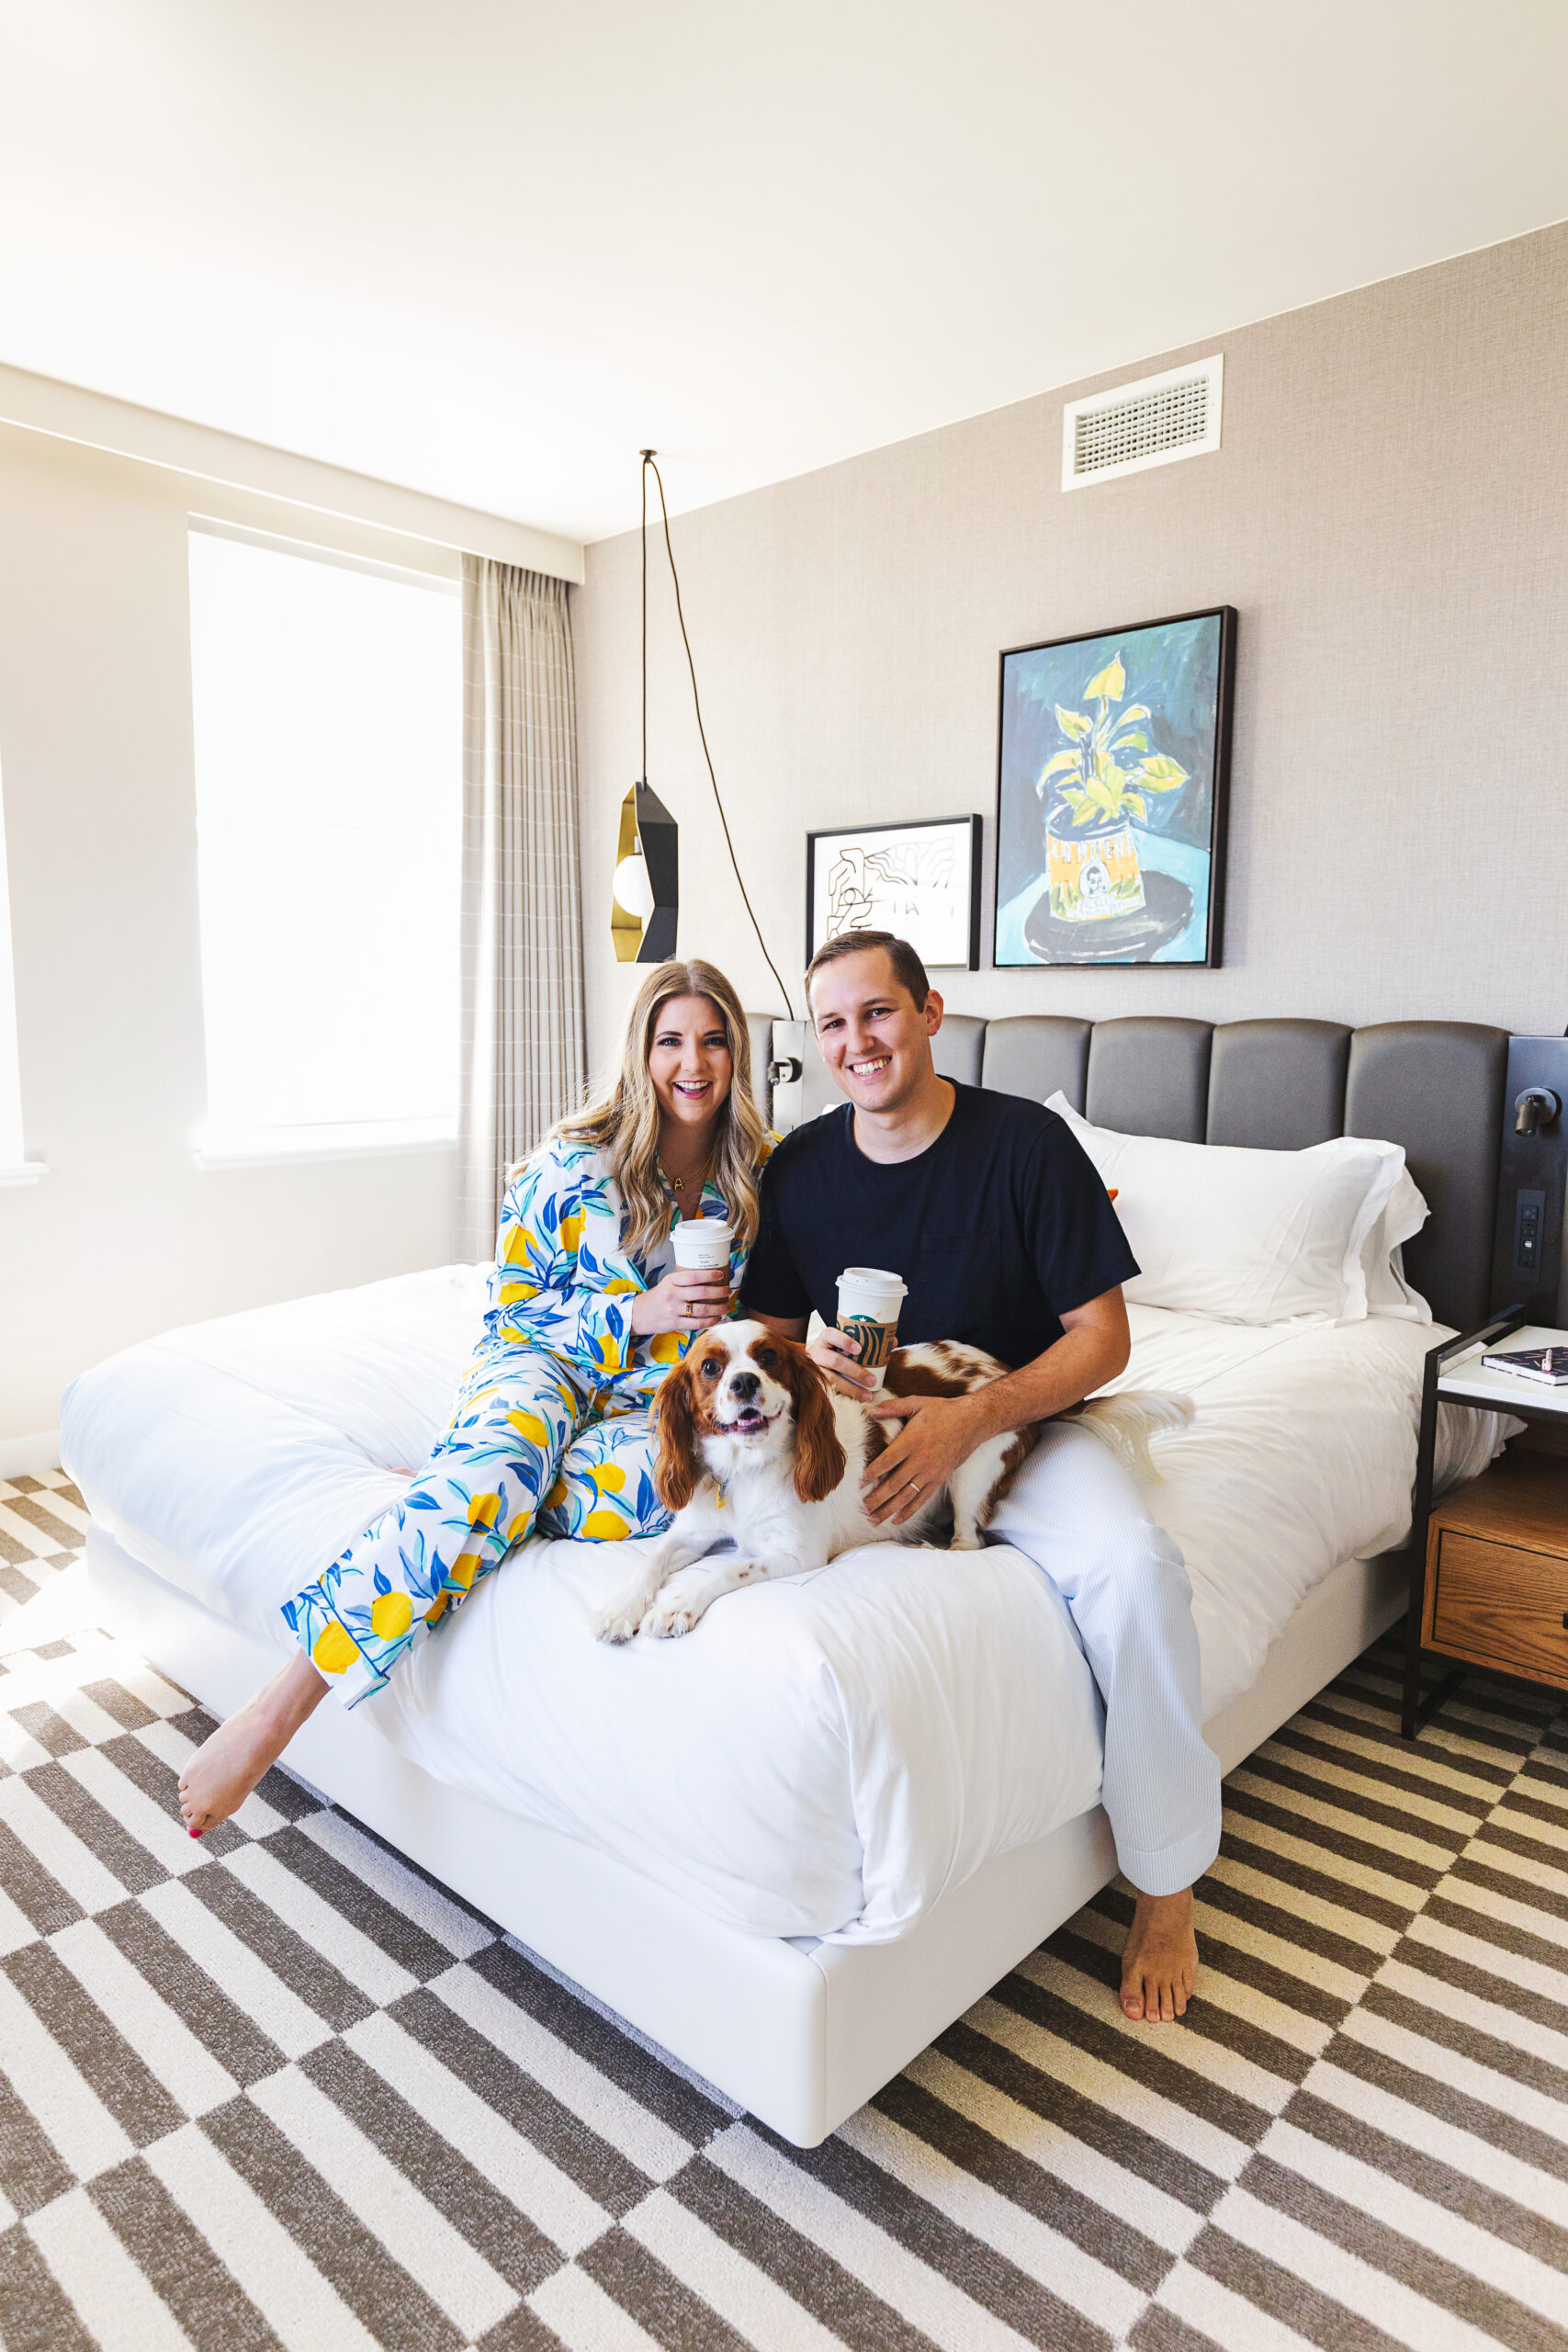 The Kimpton Harper Hotel Review – A Dog-Friendly Hotel in Fort Worth